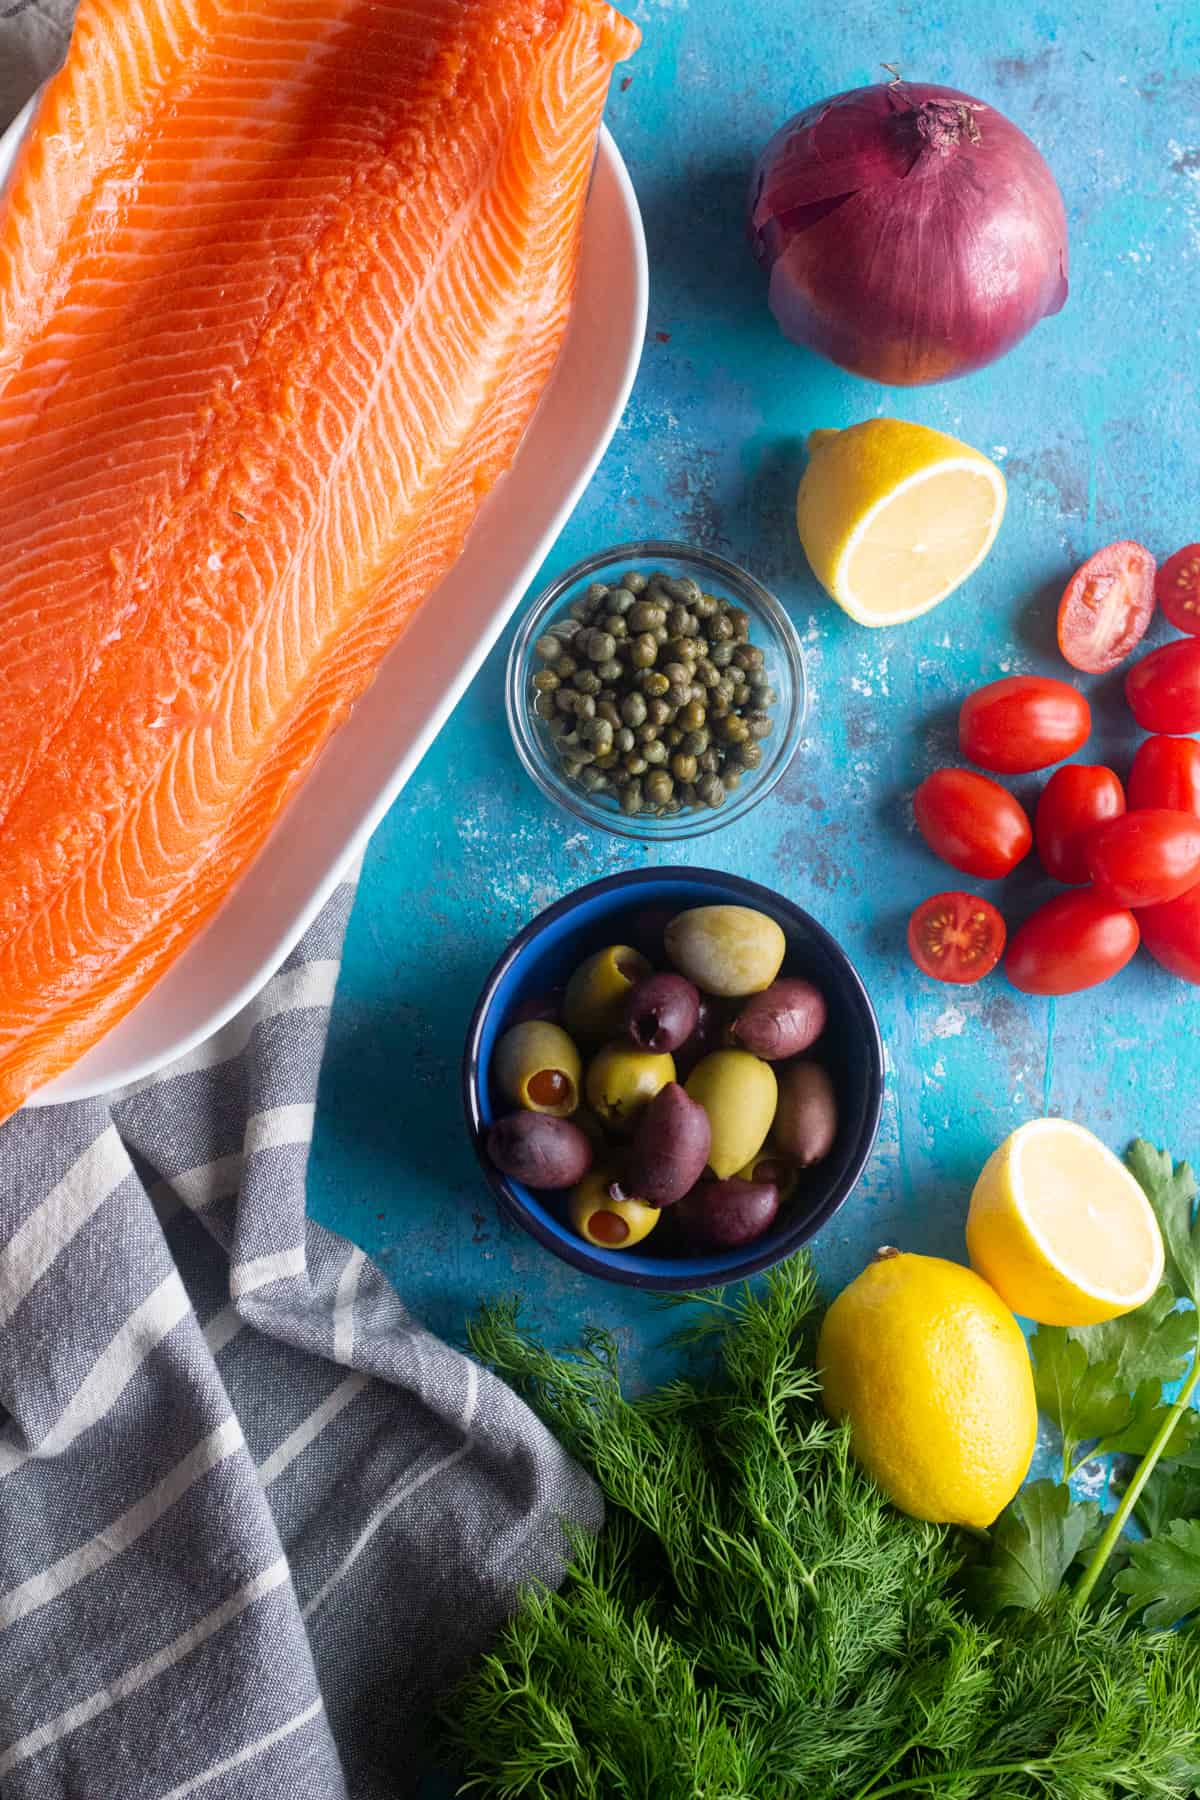 To make baked salmon, you need a side of salmon, olives, lemon, onion and tomatoes